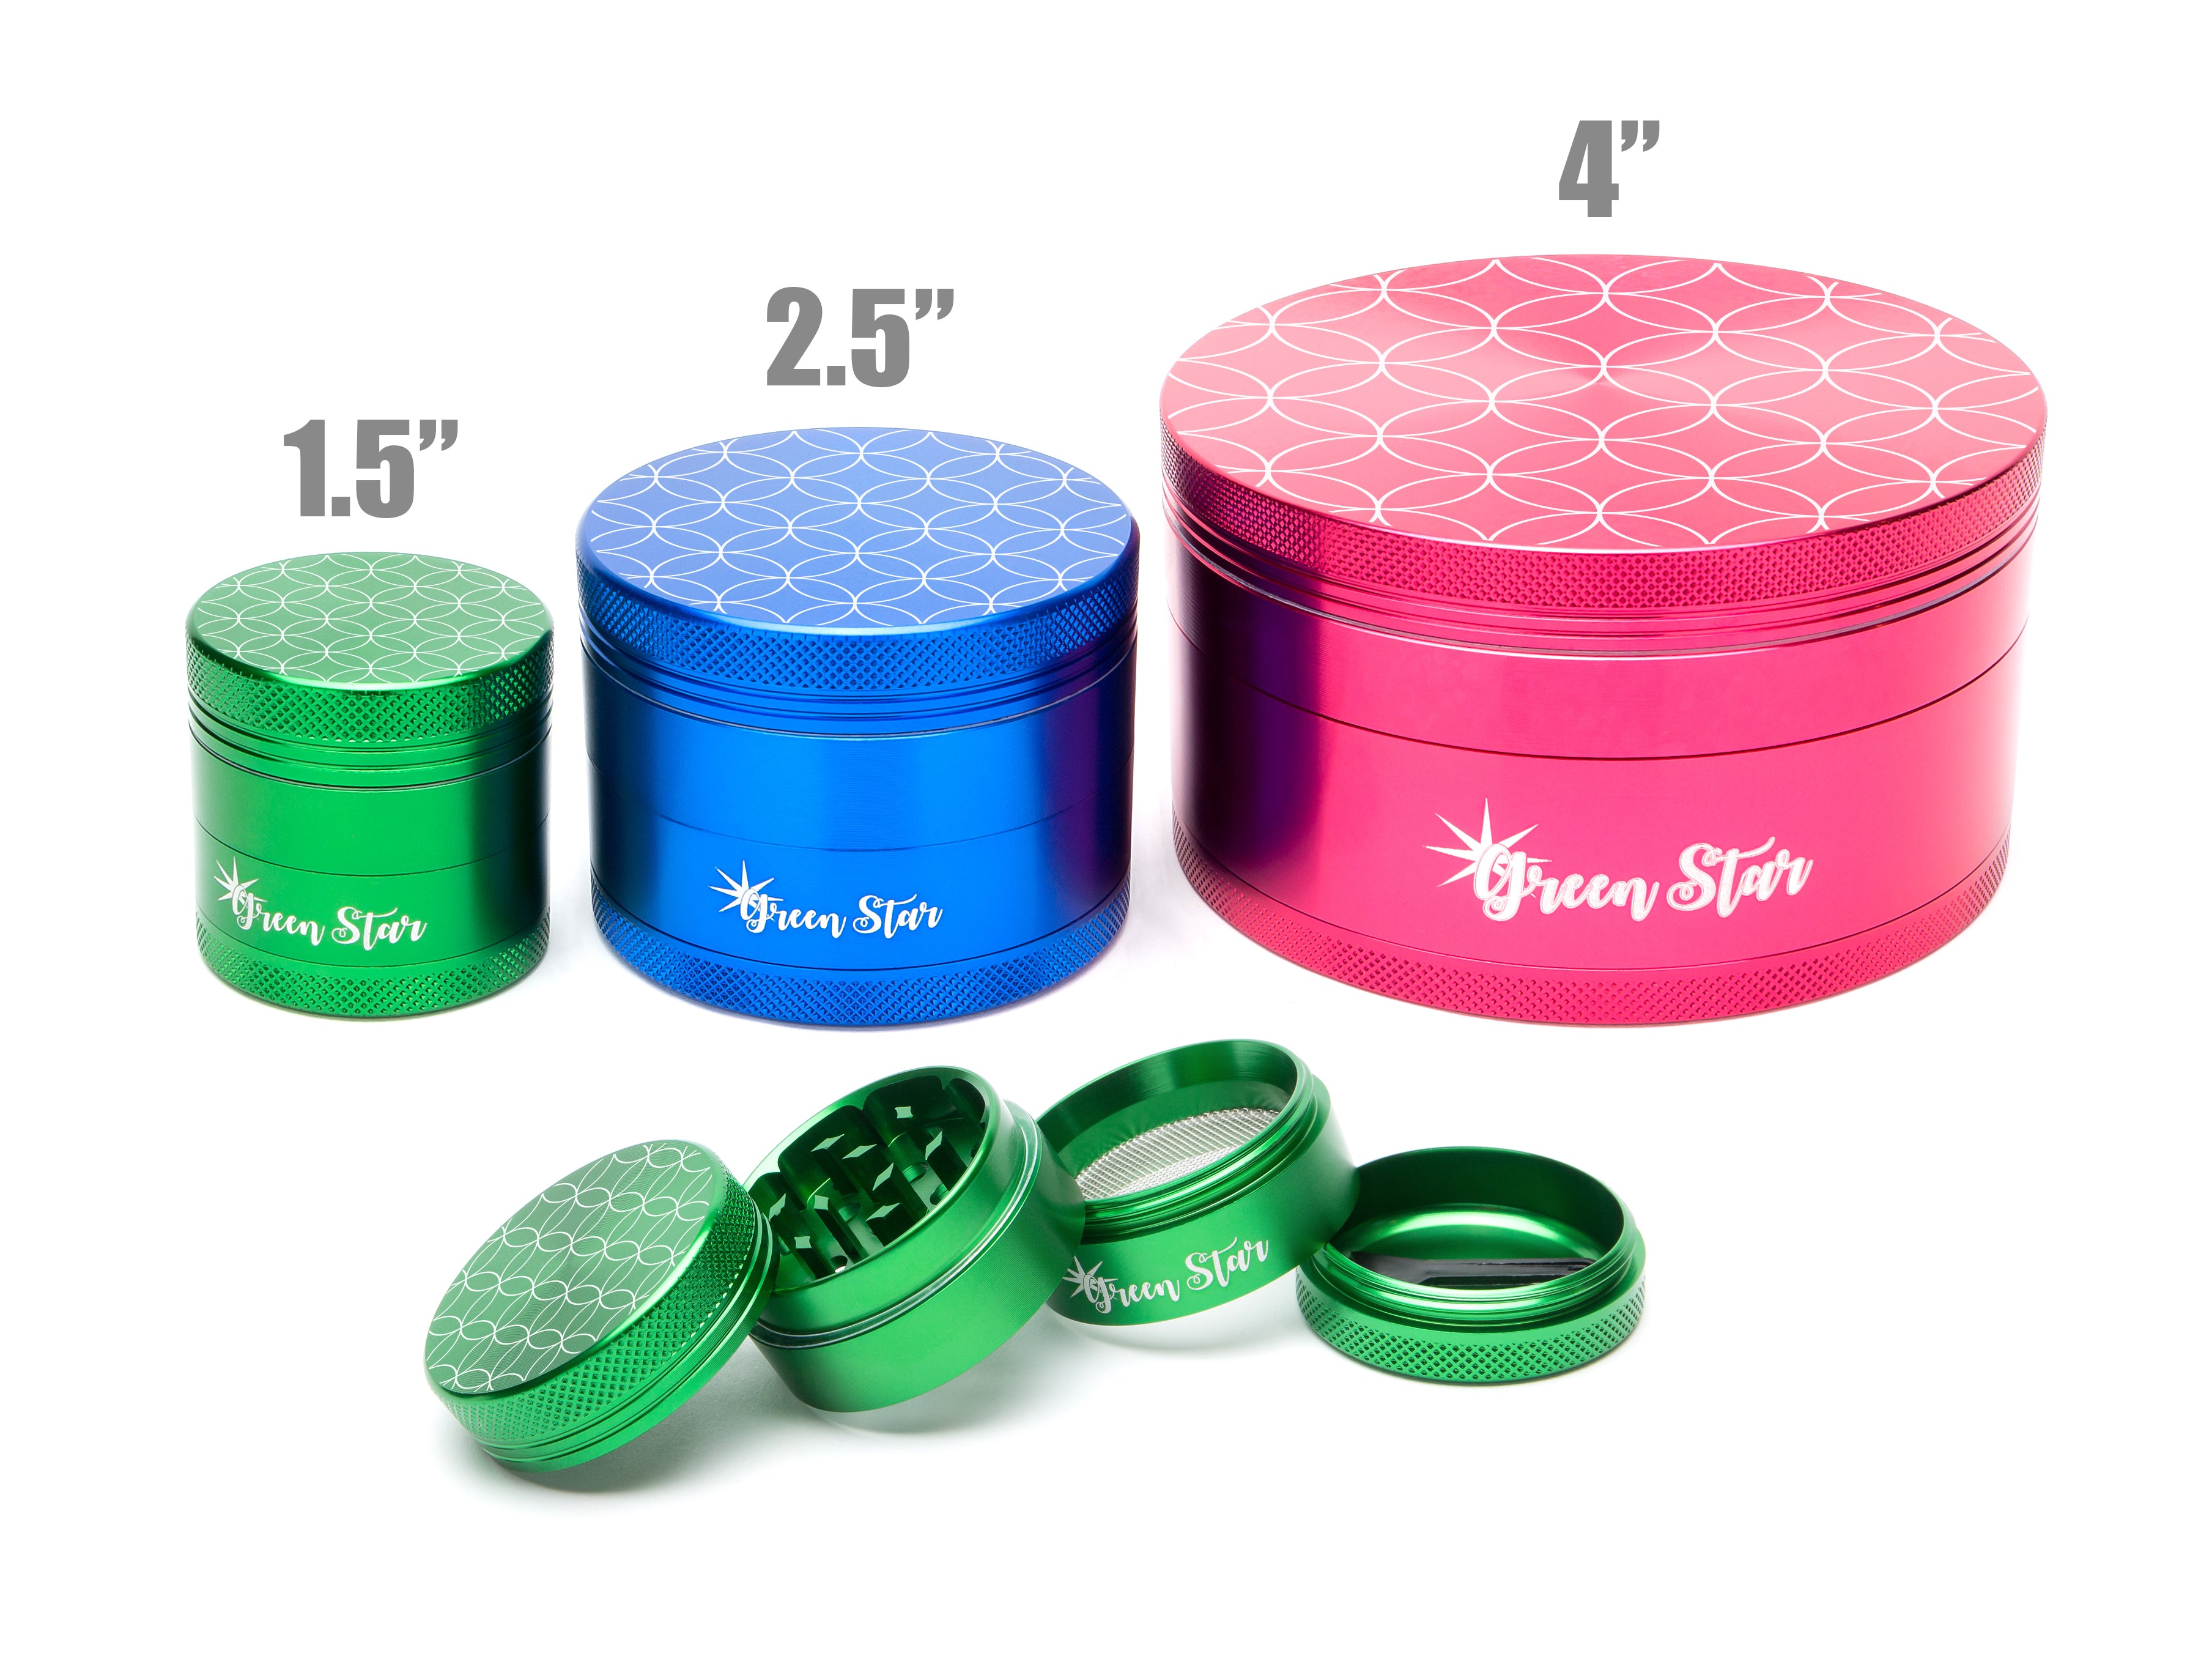 1.5" (40mm) 4-Piece Grinder with Circles Pattern Design